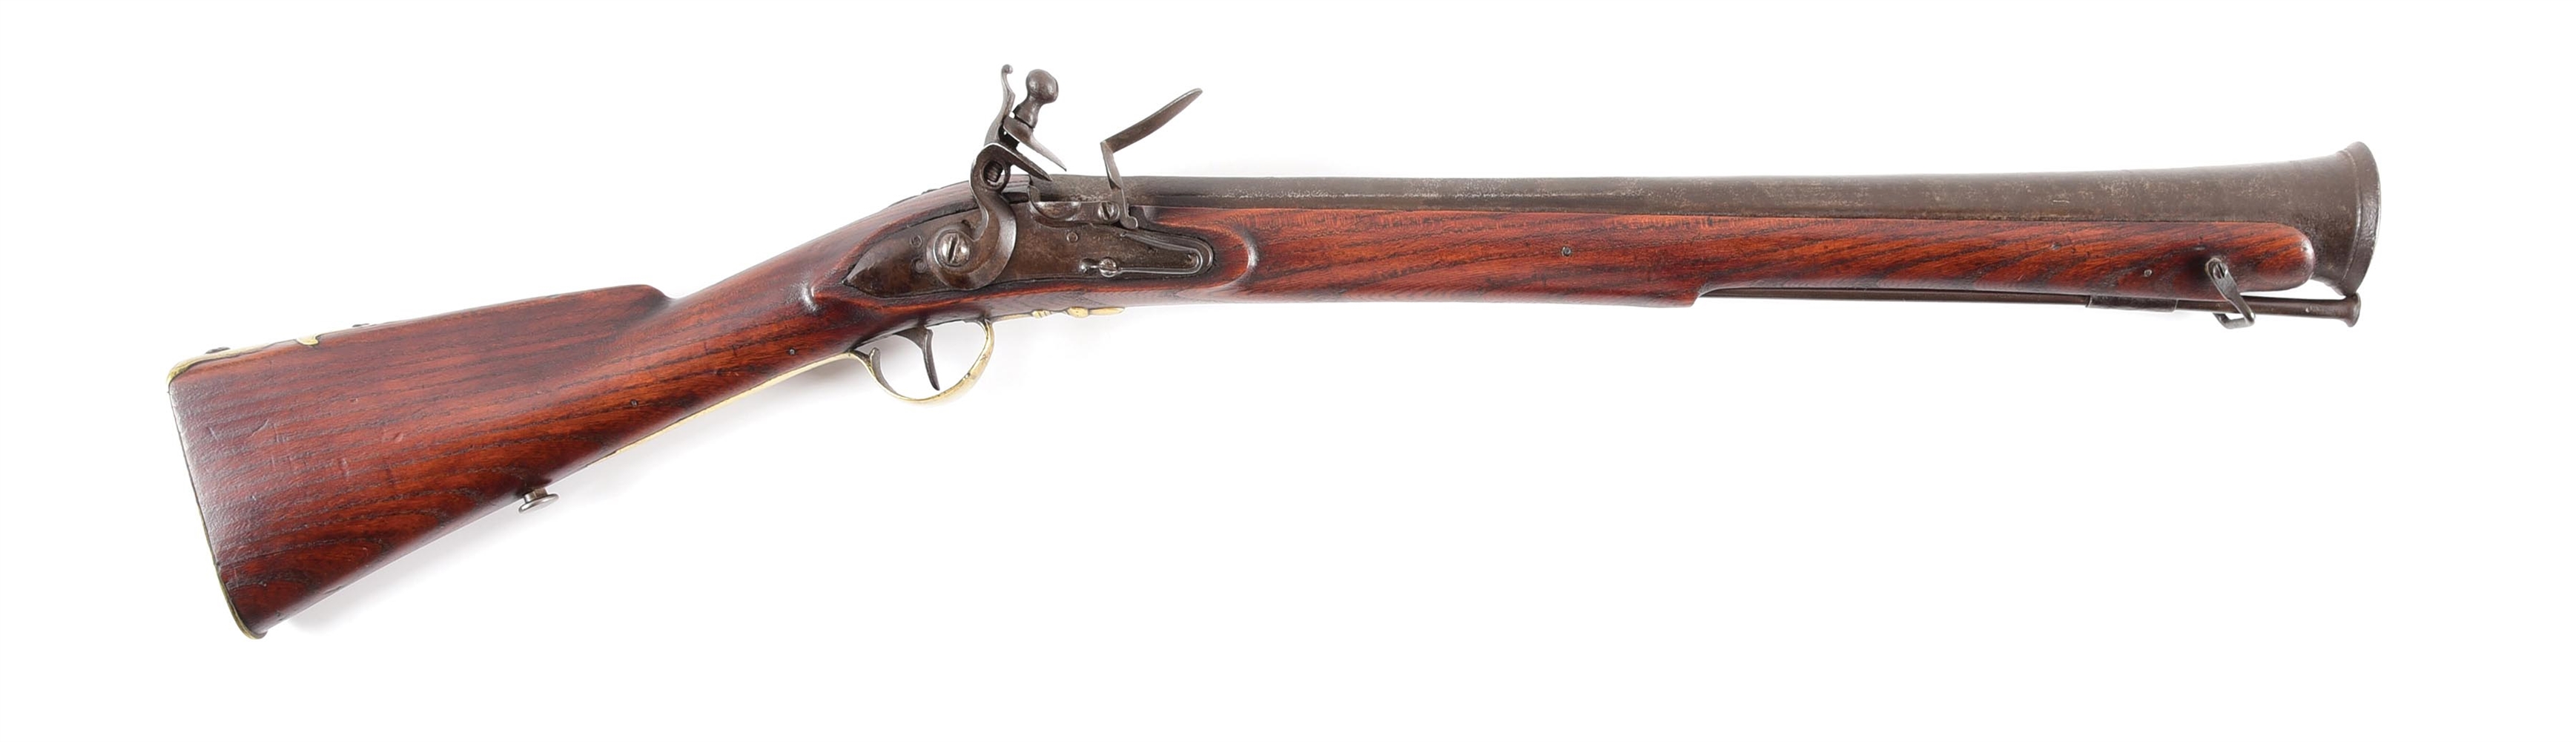 (A) AN OTTOMAN BLUNDERBUSS IS THE BRITISH STYLE.